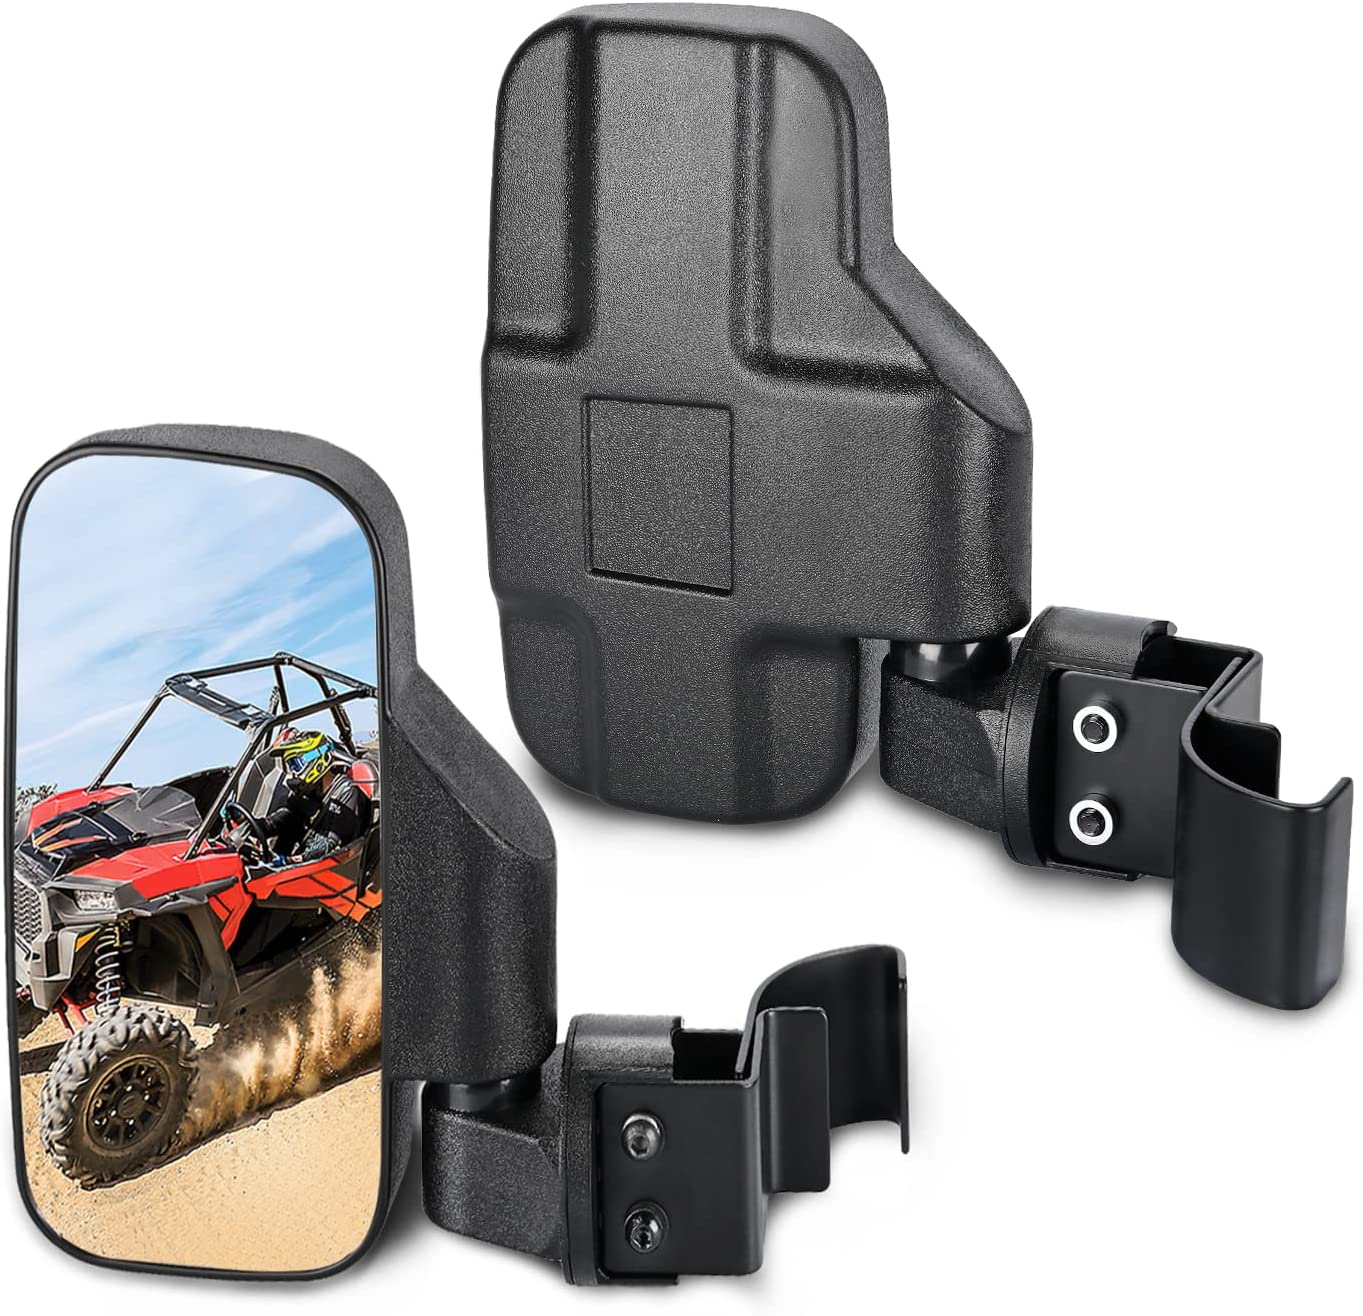 UTV Side Mirro Fit Pro-Fit Cage Compatible with Polaris Ranger 570 900 XP 1000 2015-2023 General 1000, Can Am Defender Maverick Trail, Breakaway and 360 degree Adjustable mirrors